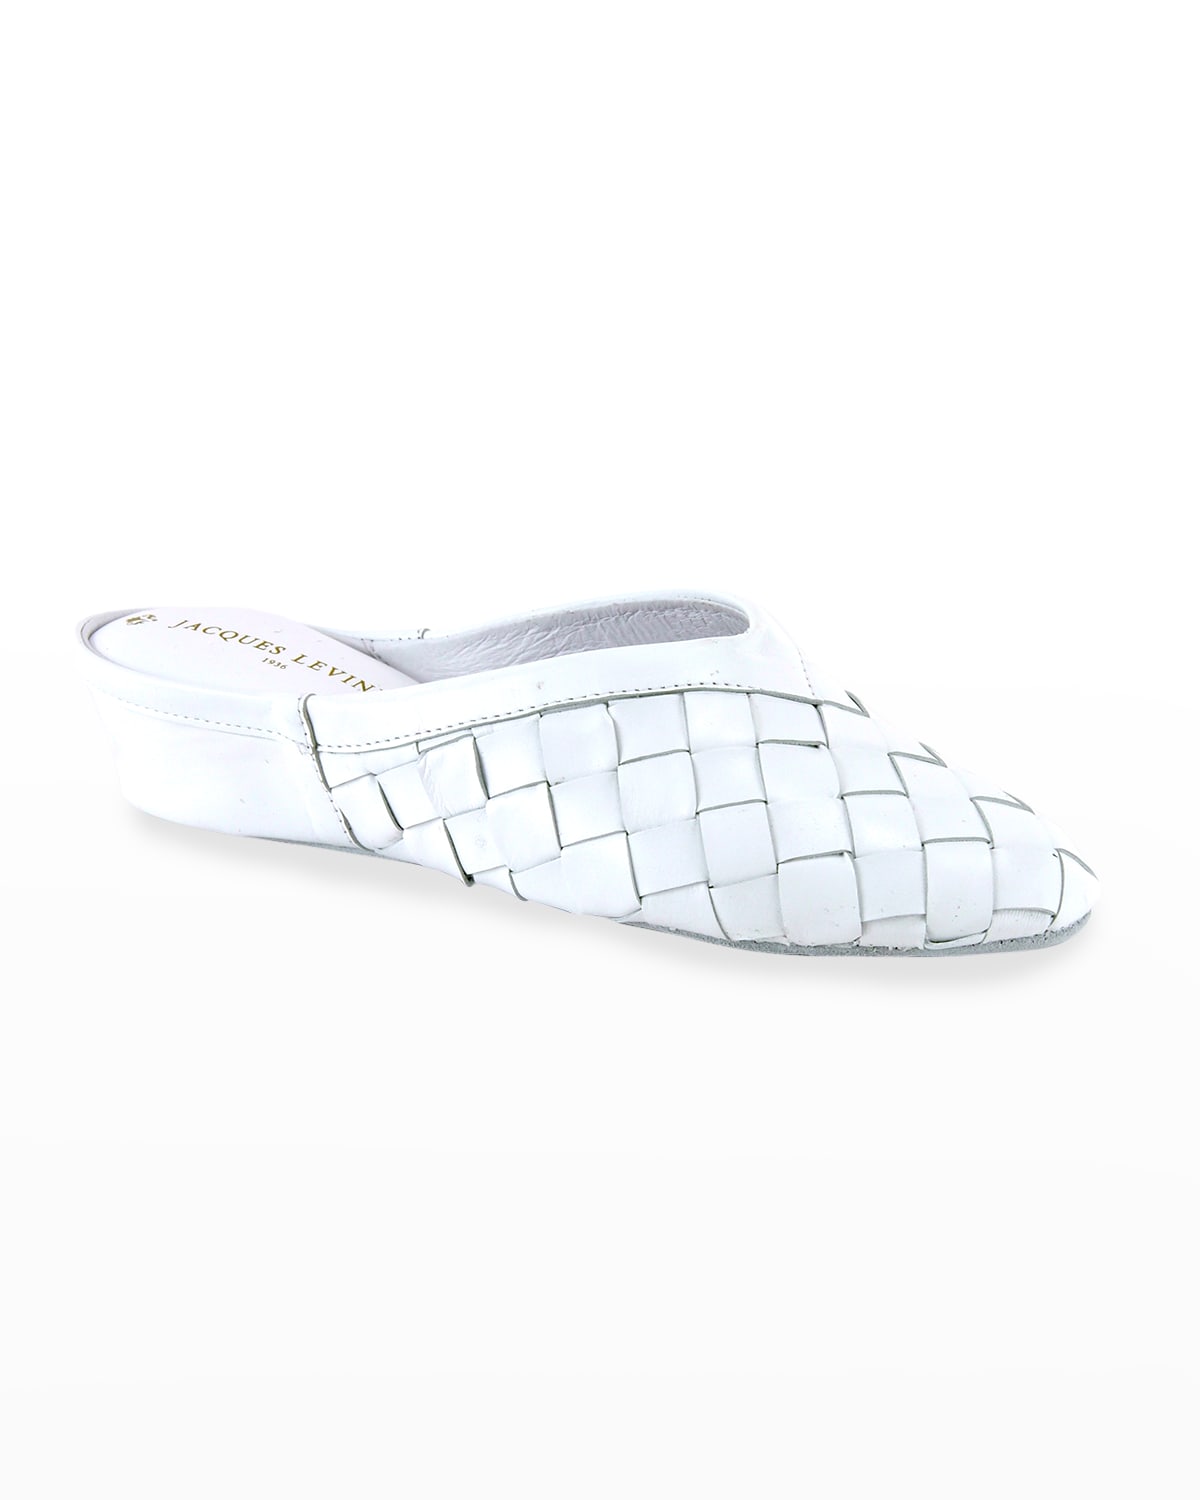 Jacques Levine Woven Leather Wedge Slippers